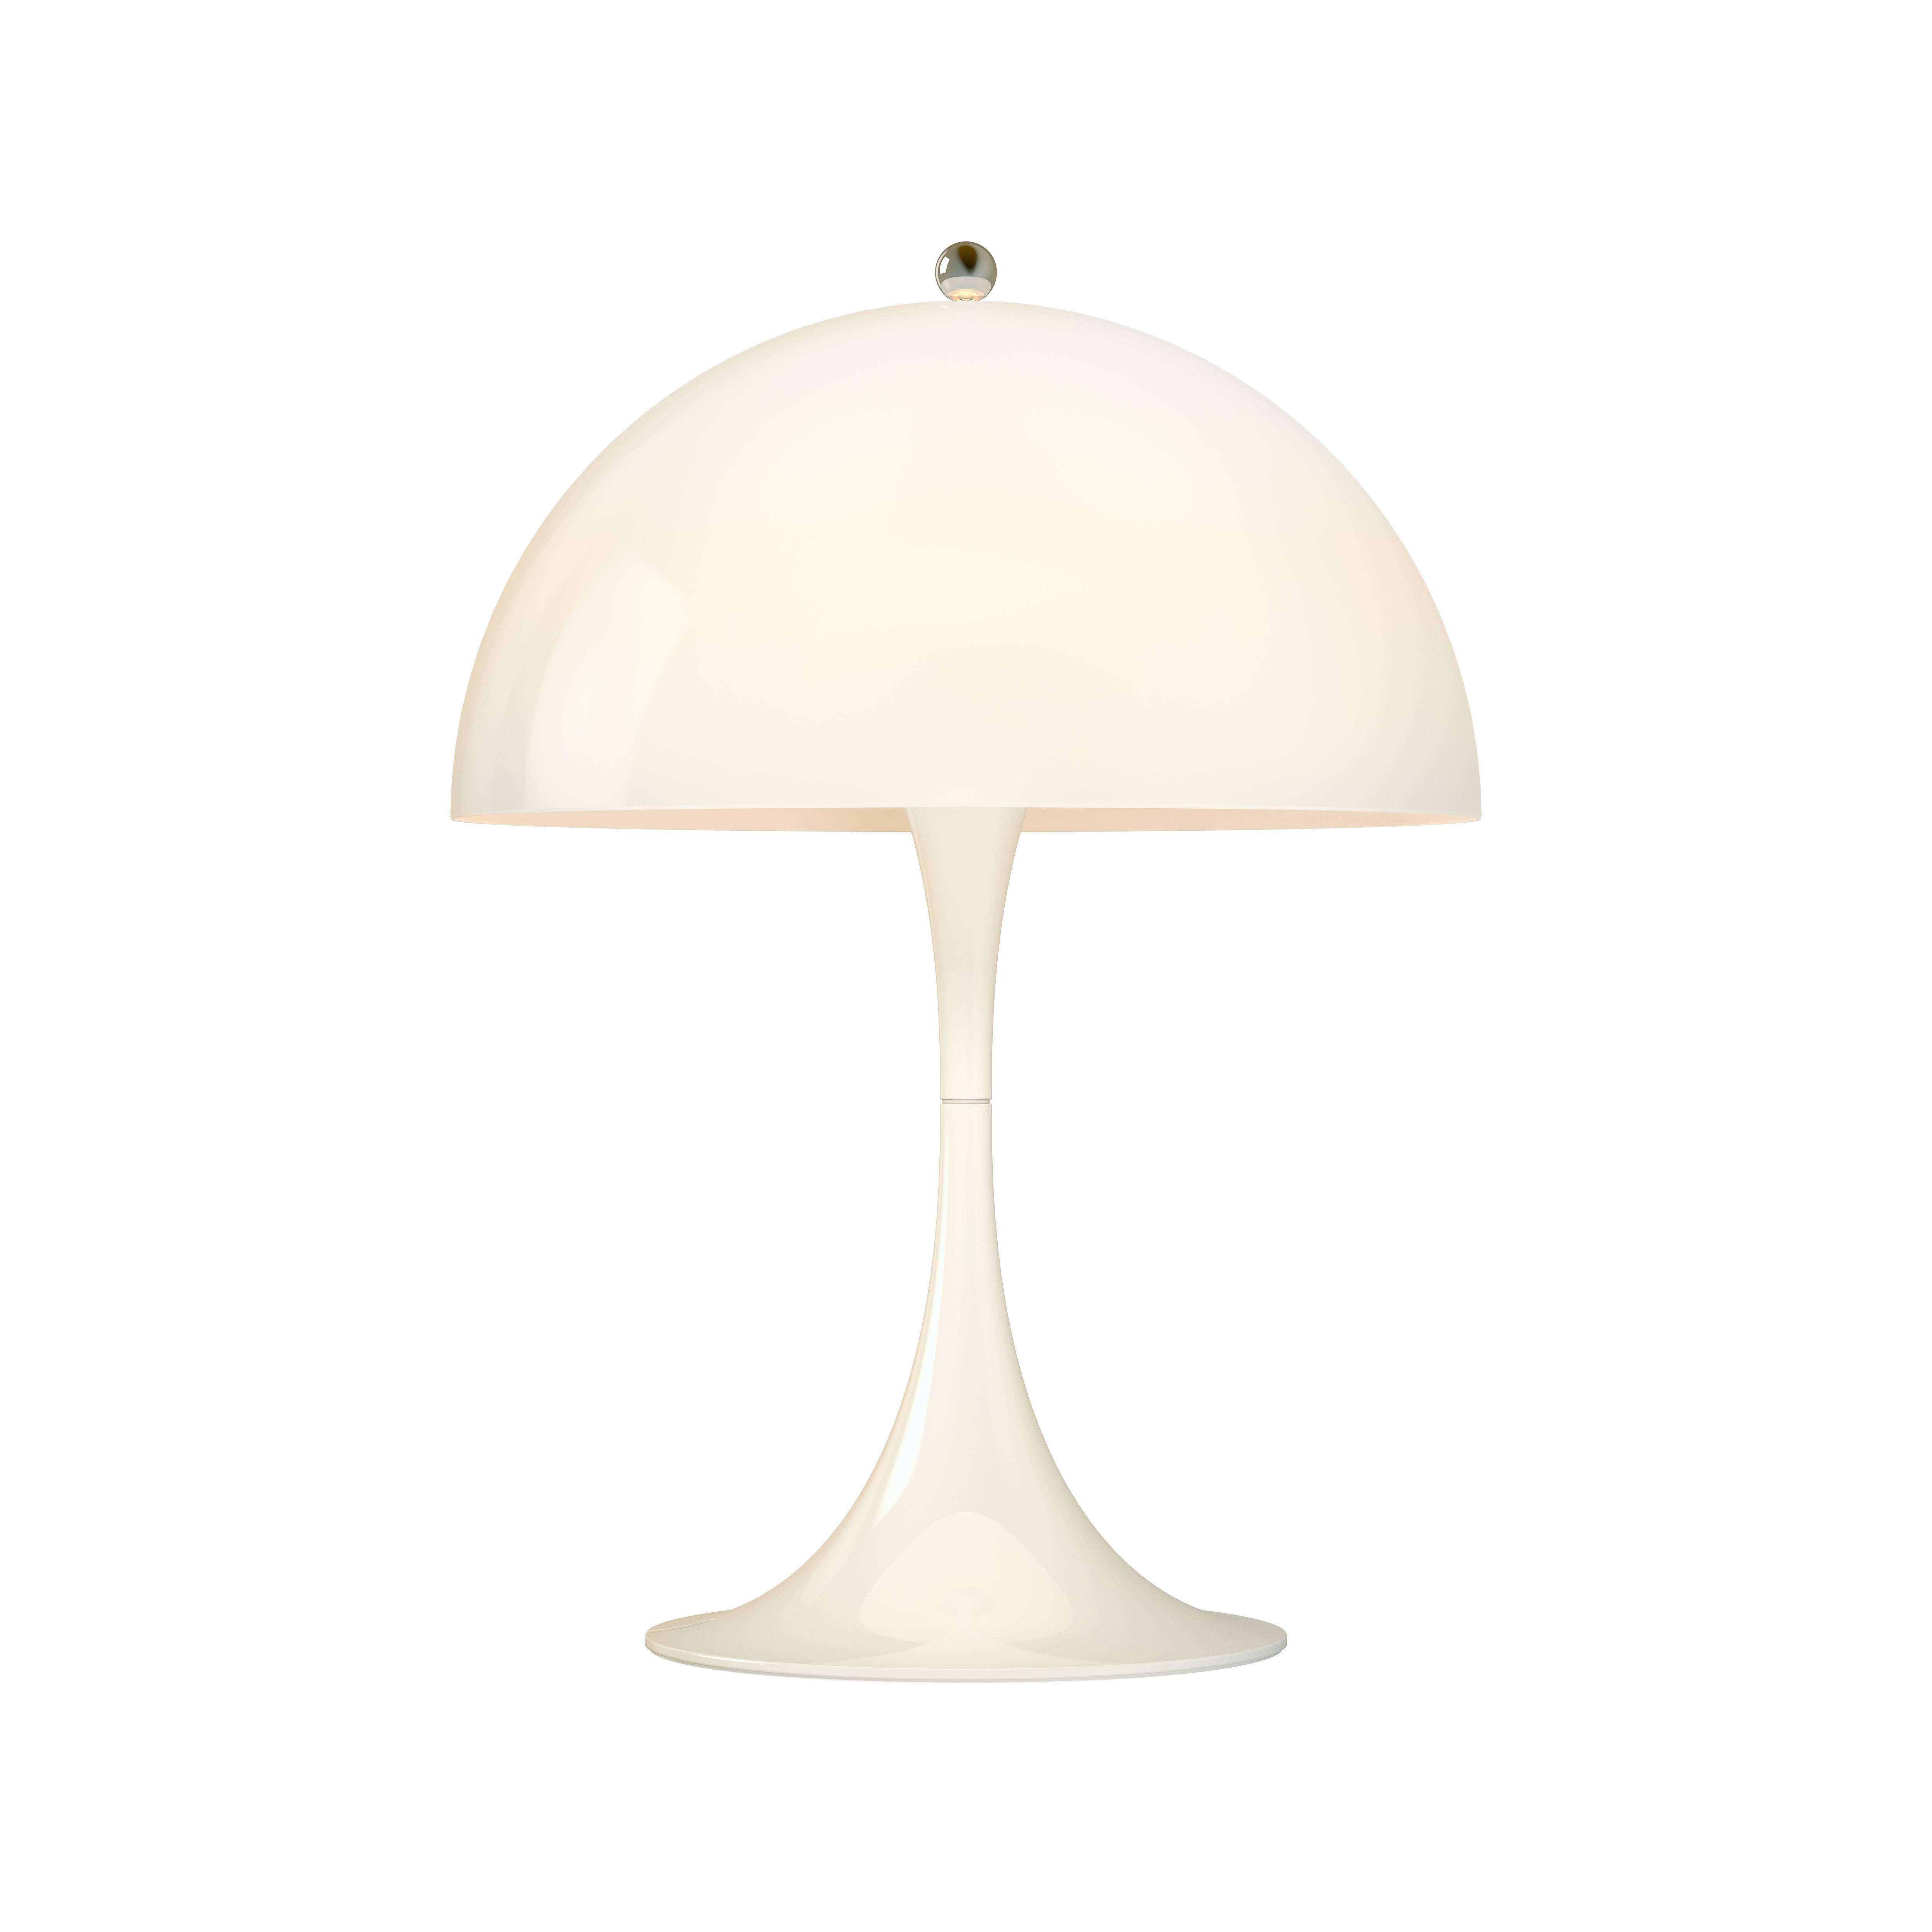 Verner Panton 'Panthella 250' LED Table Lamp in White for Louis Poulsen In New Condition For Sale In Glendale, CA